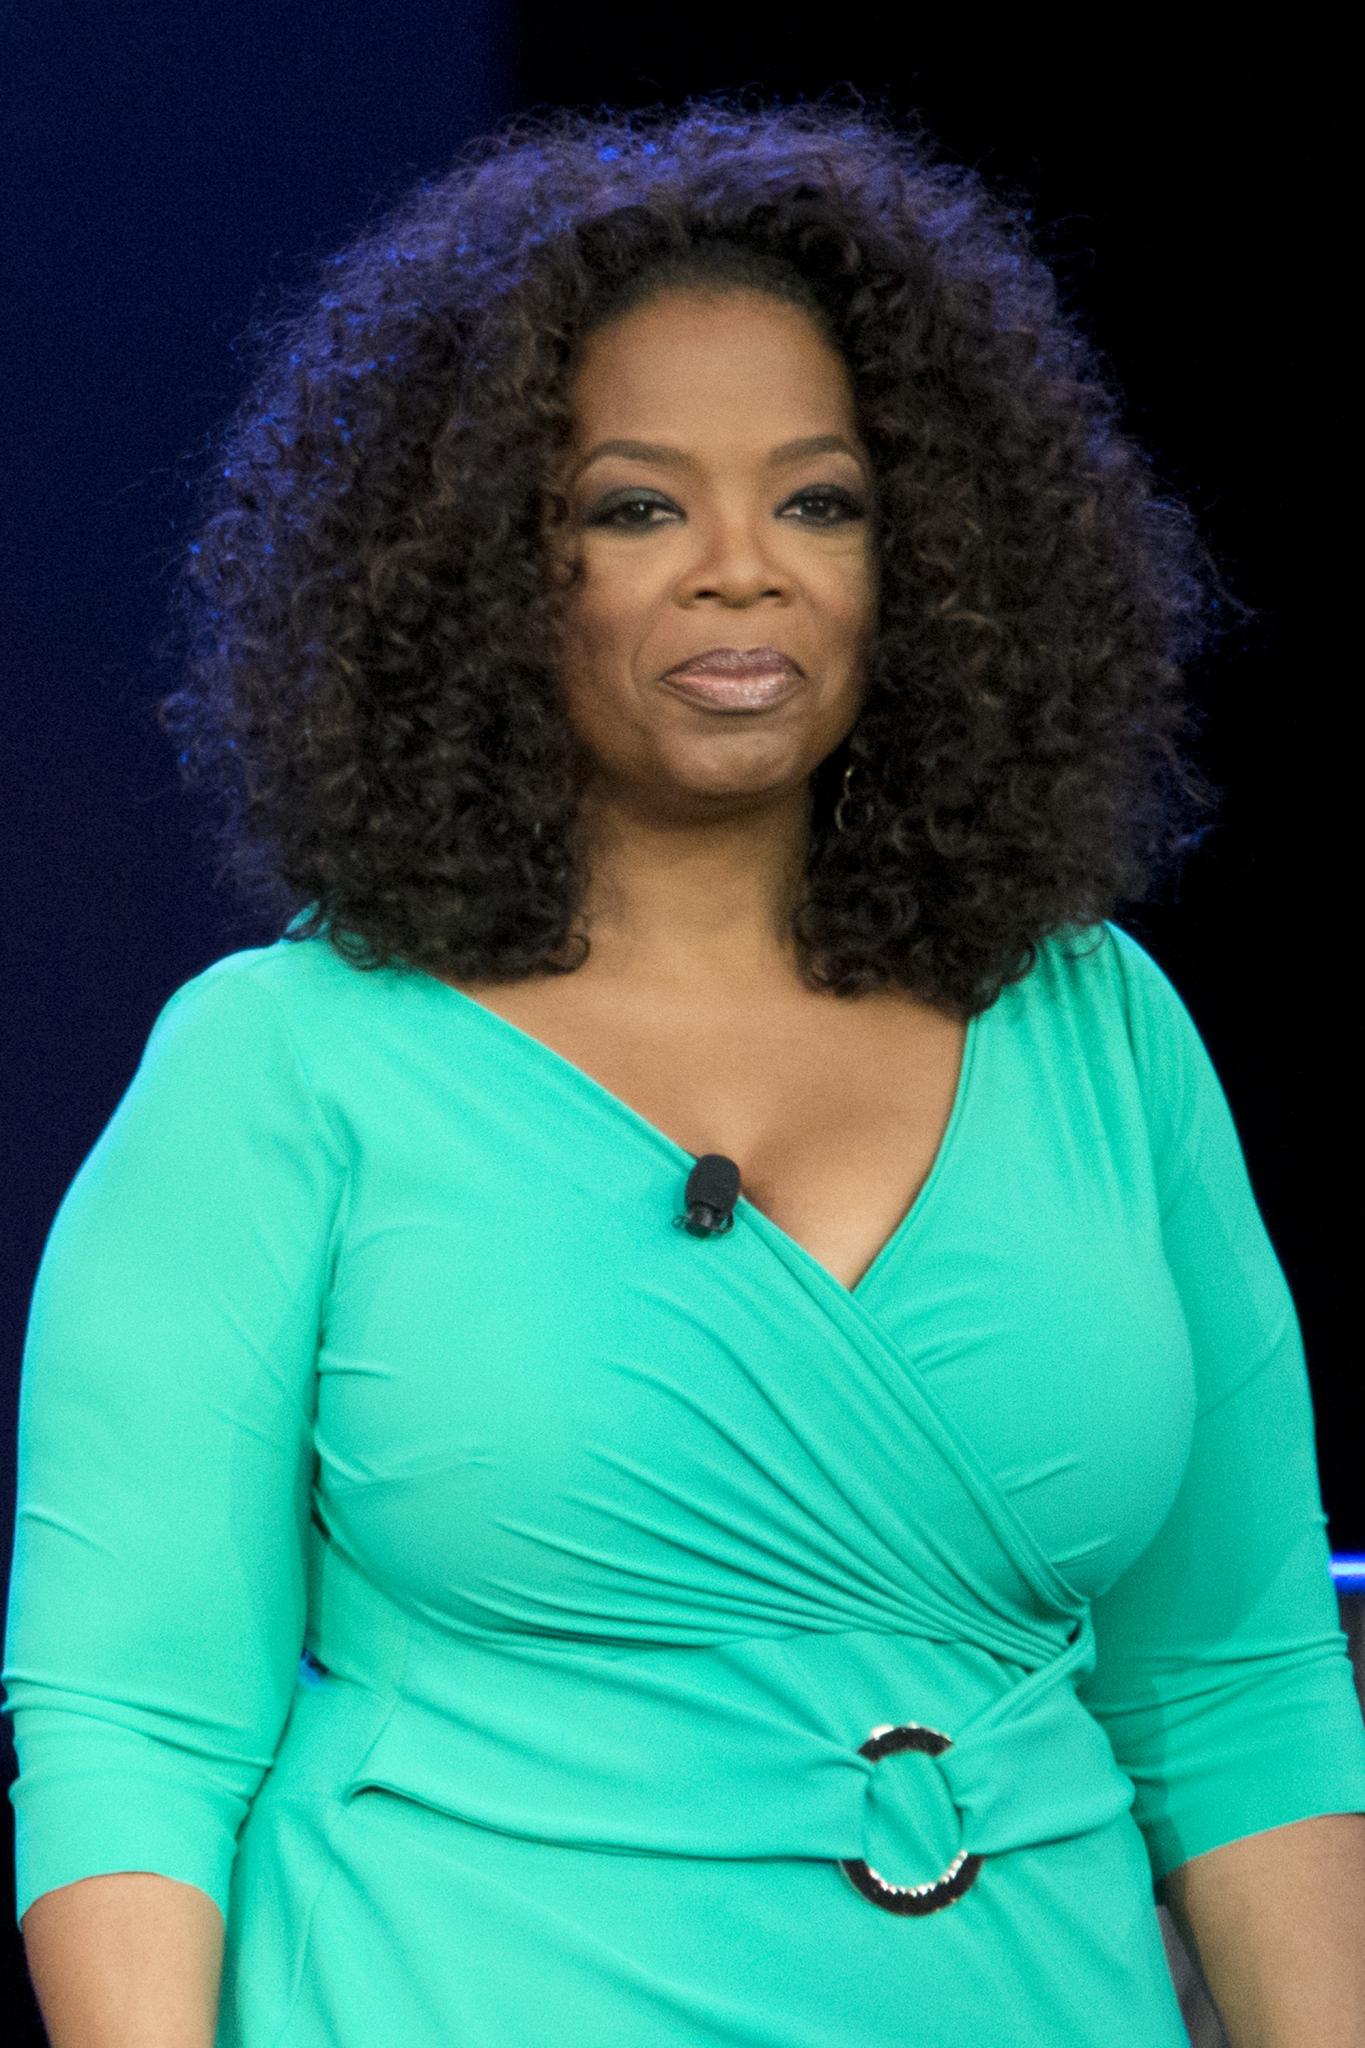 HBO to Develop Comedy From Oprah